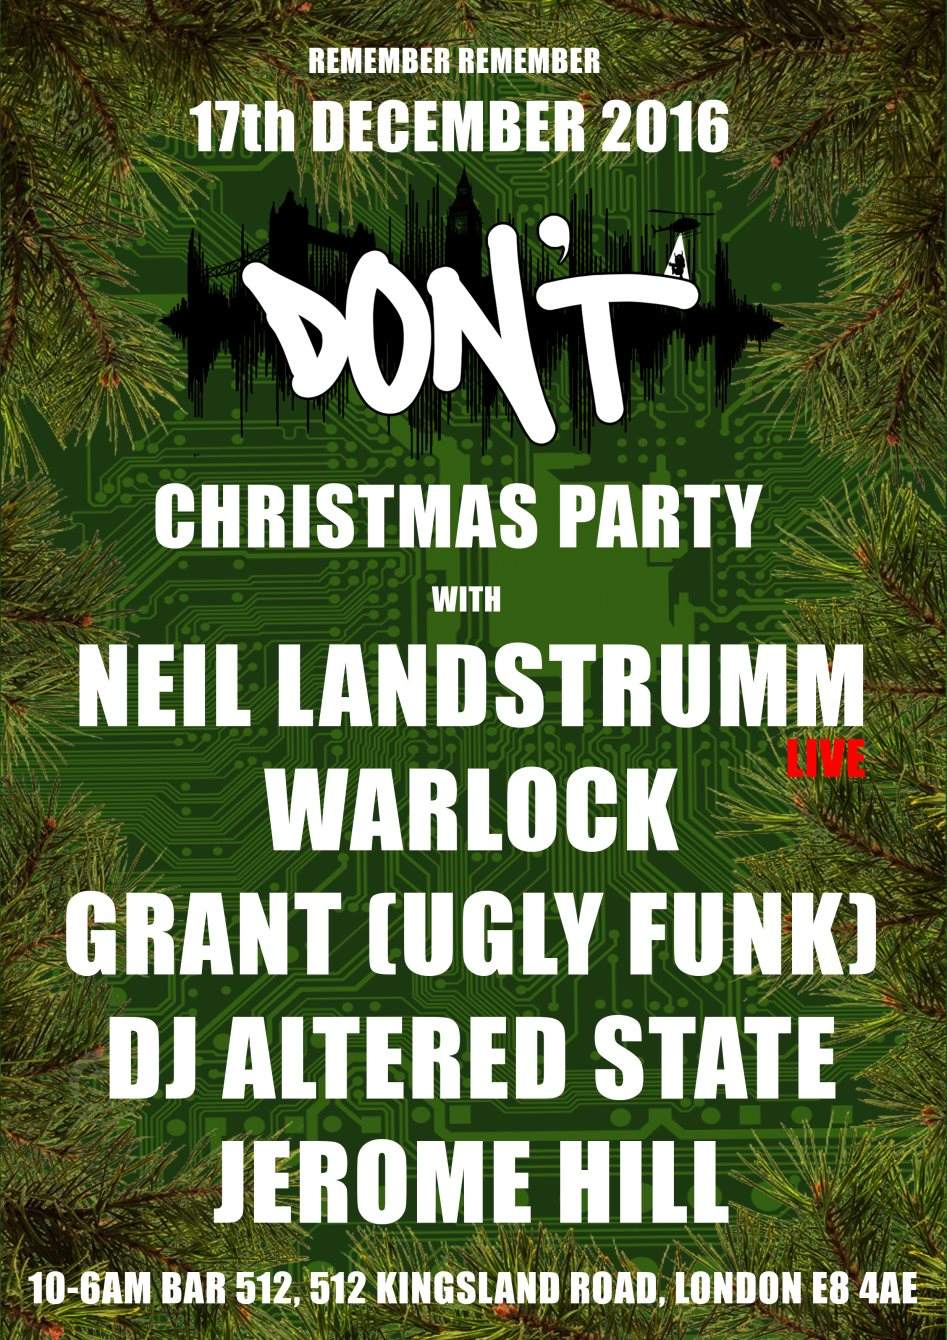 Don't - The Christmas Party with Neil Landstrumm Live - Página frontal